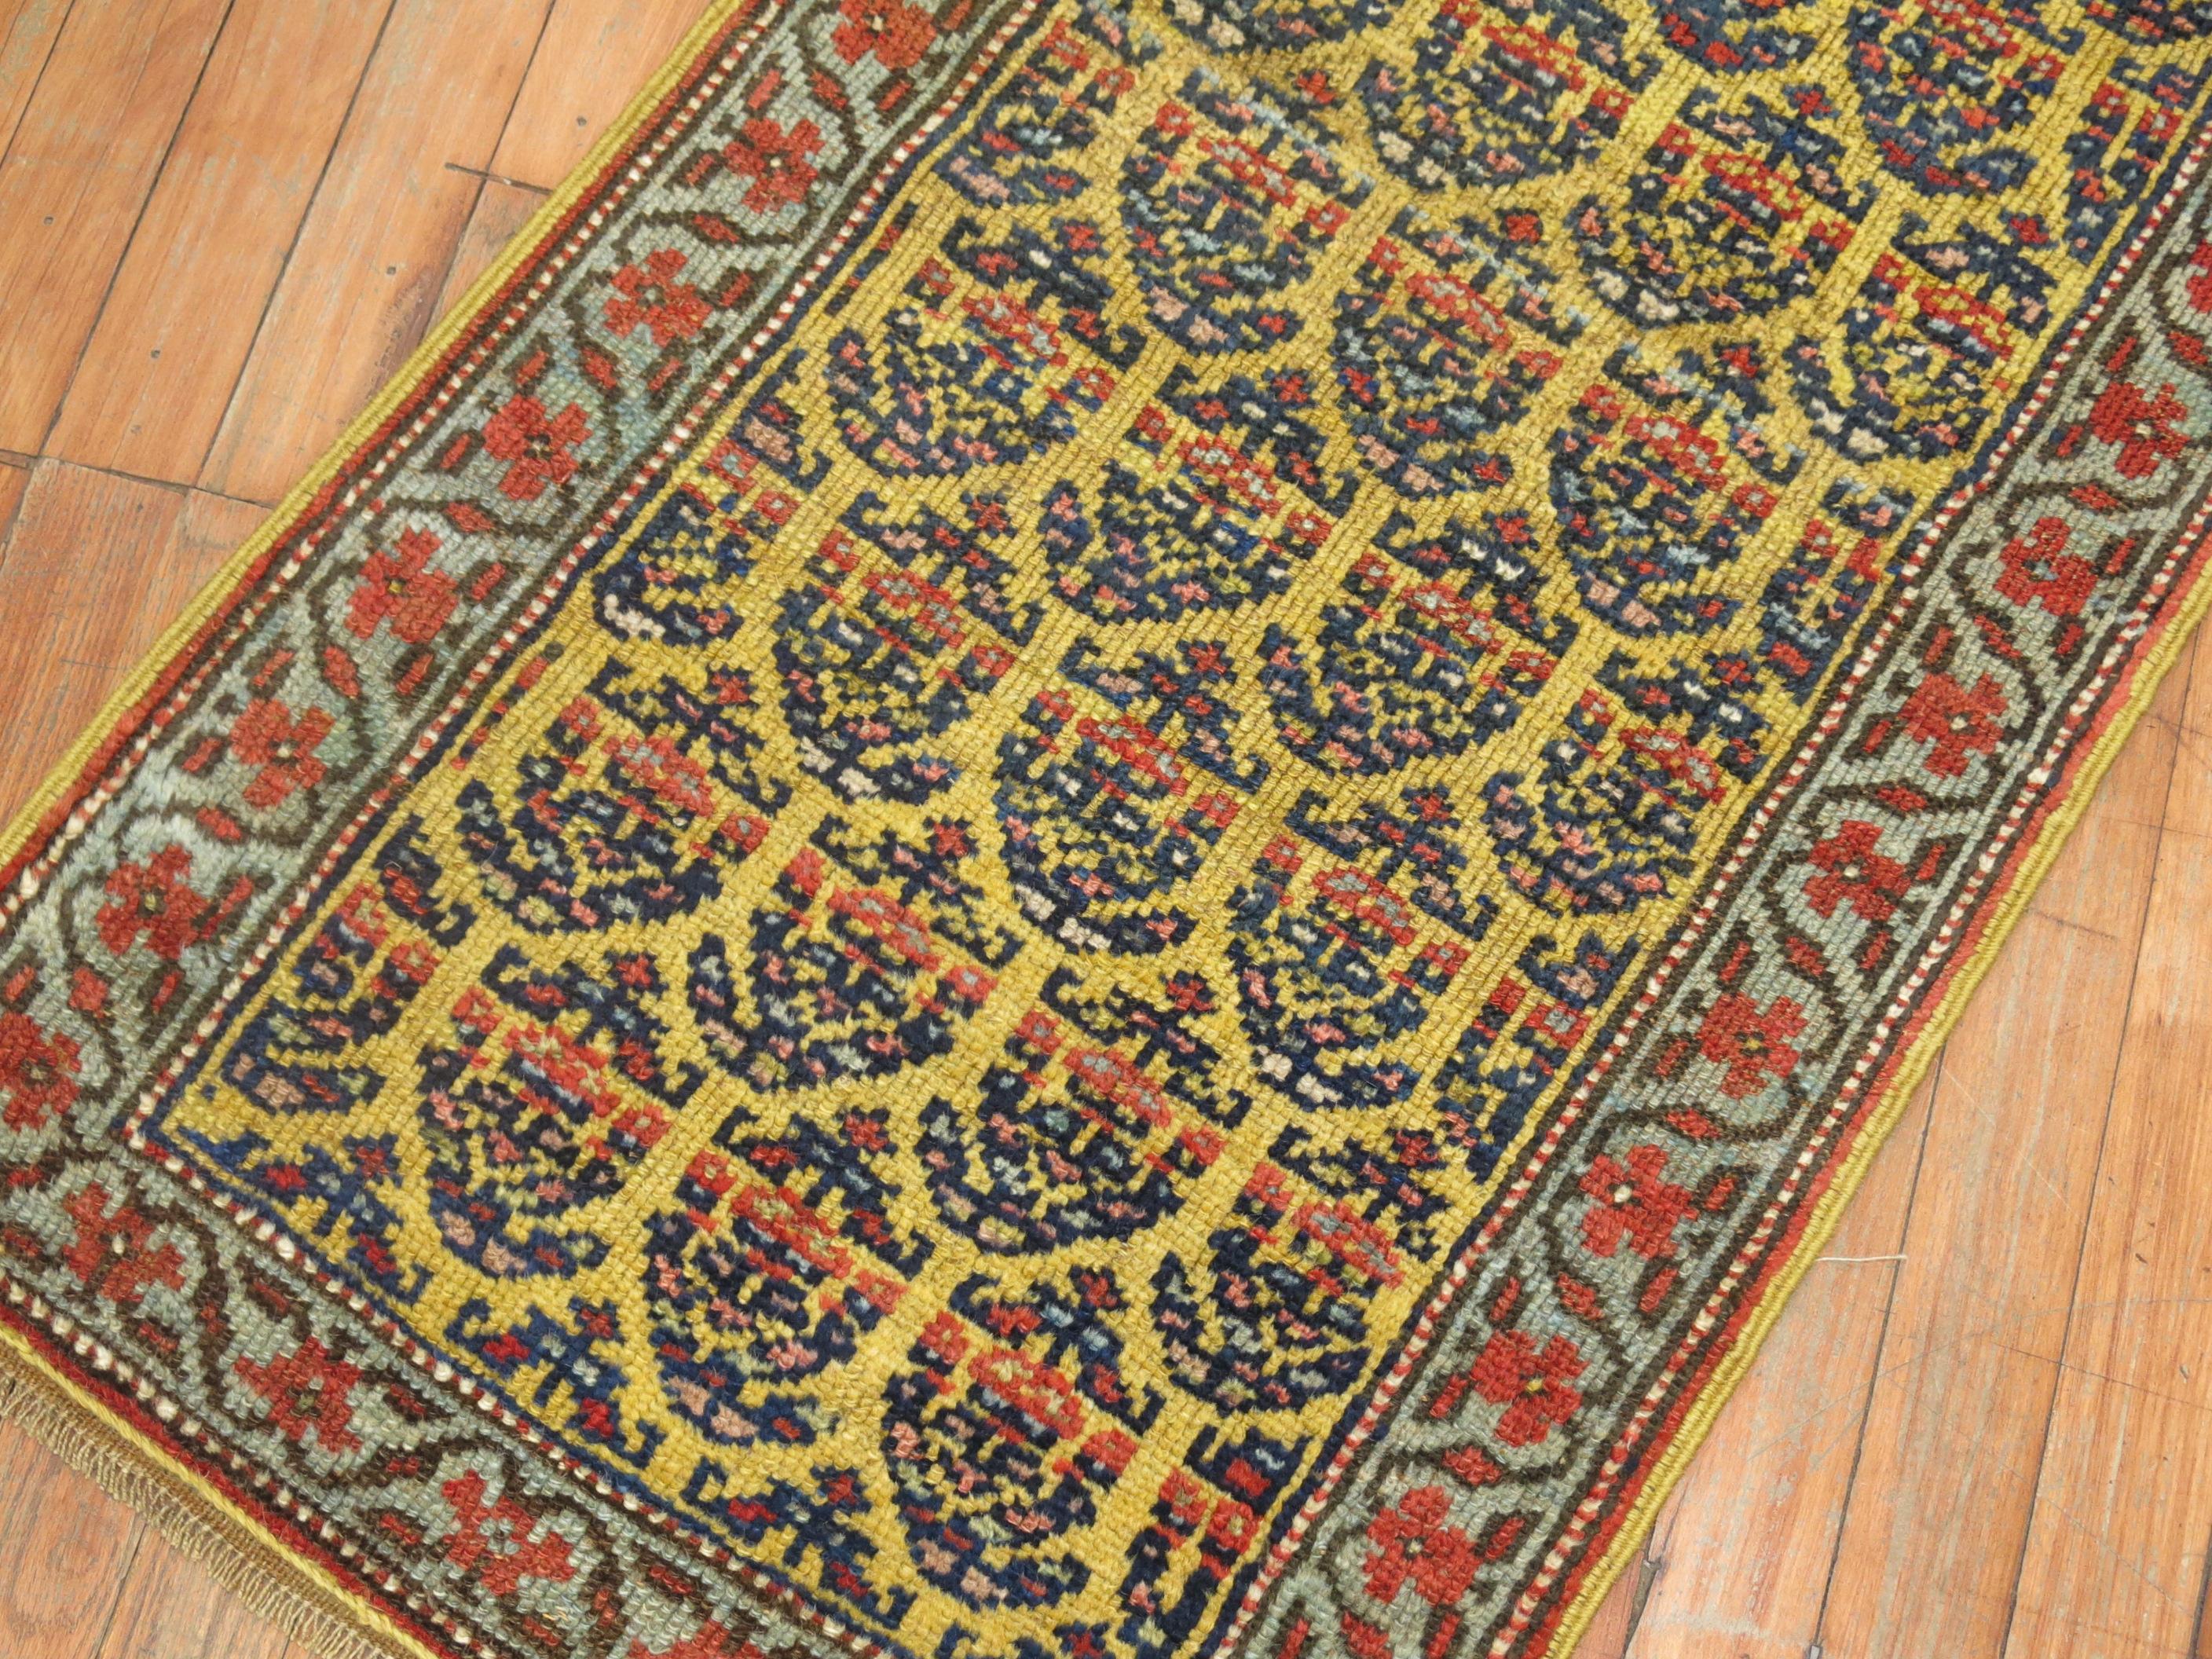 Very narrow finely woven one of a kind Persian runner with a navy paisley motif on a yellow field.

Measures: 1'11